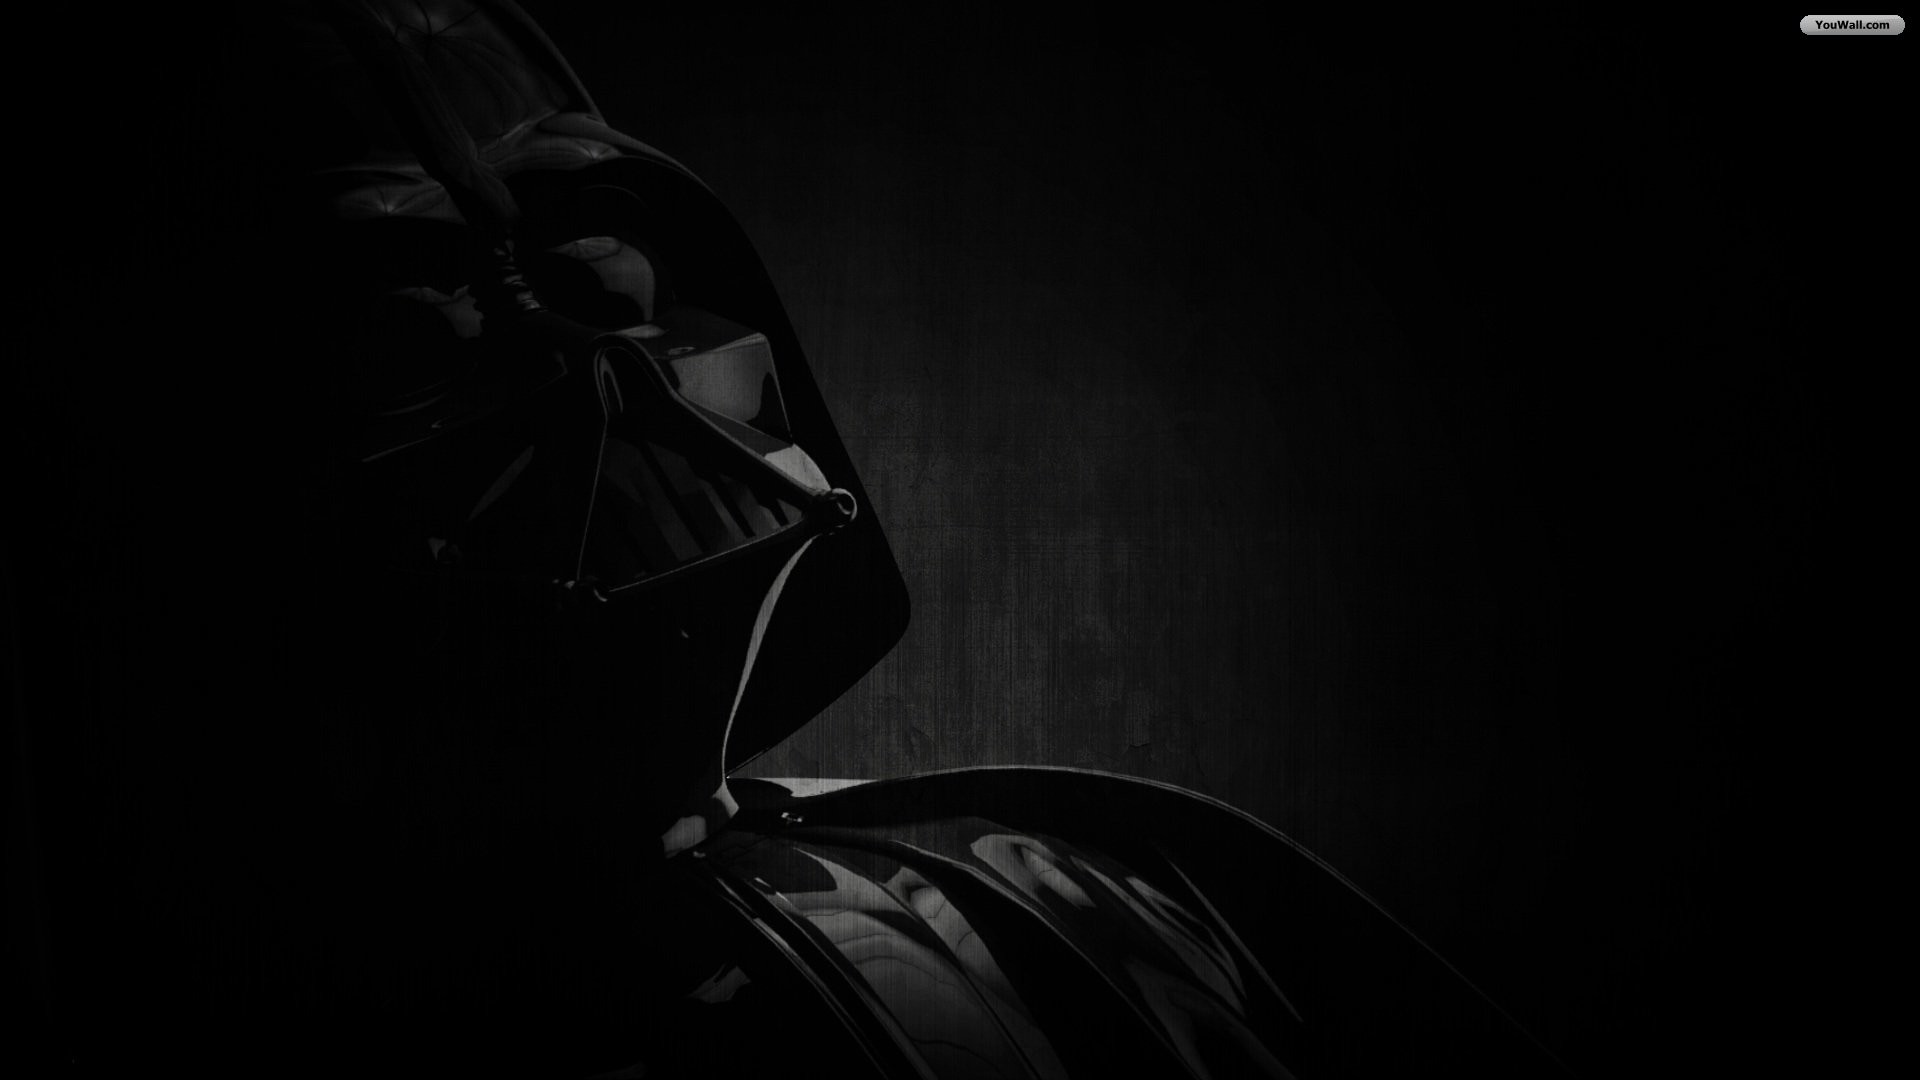 Darth Vader Wallpaper Collection For Free Download